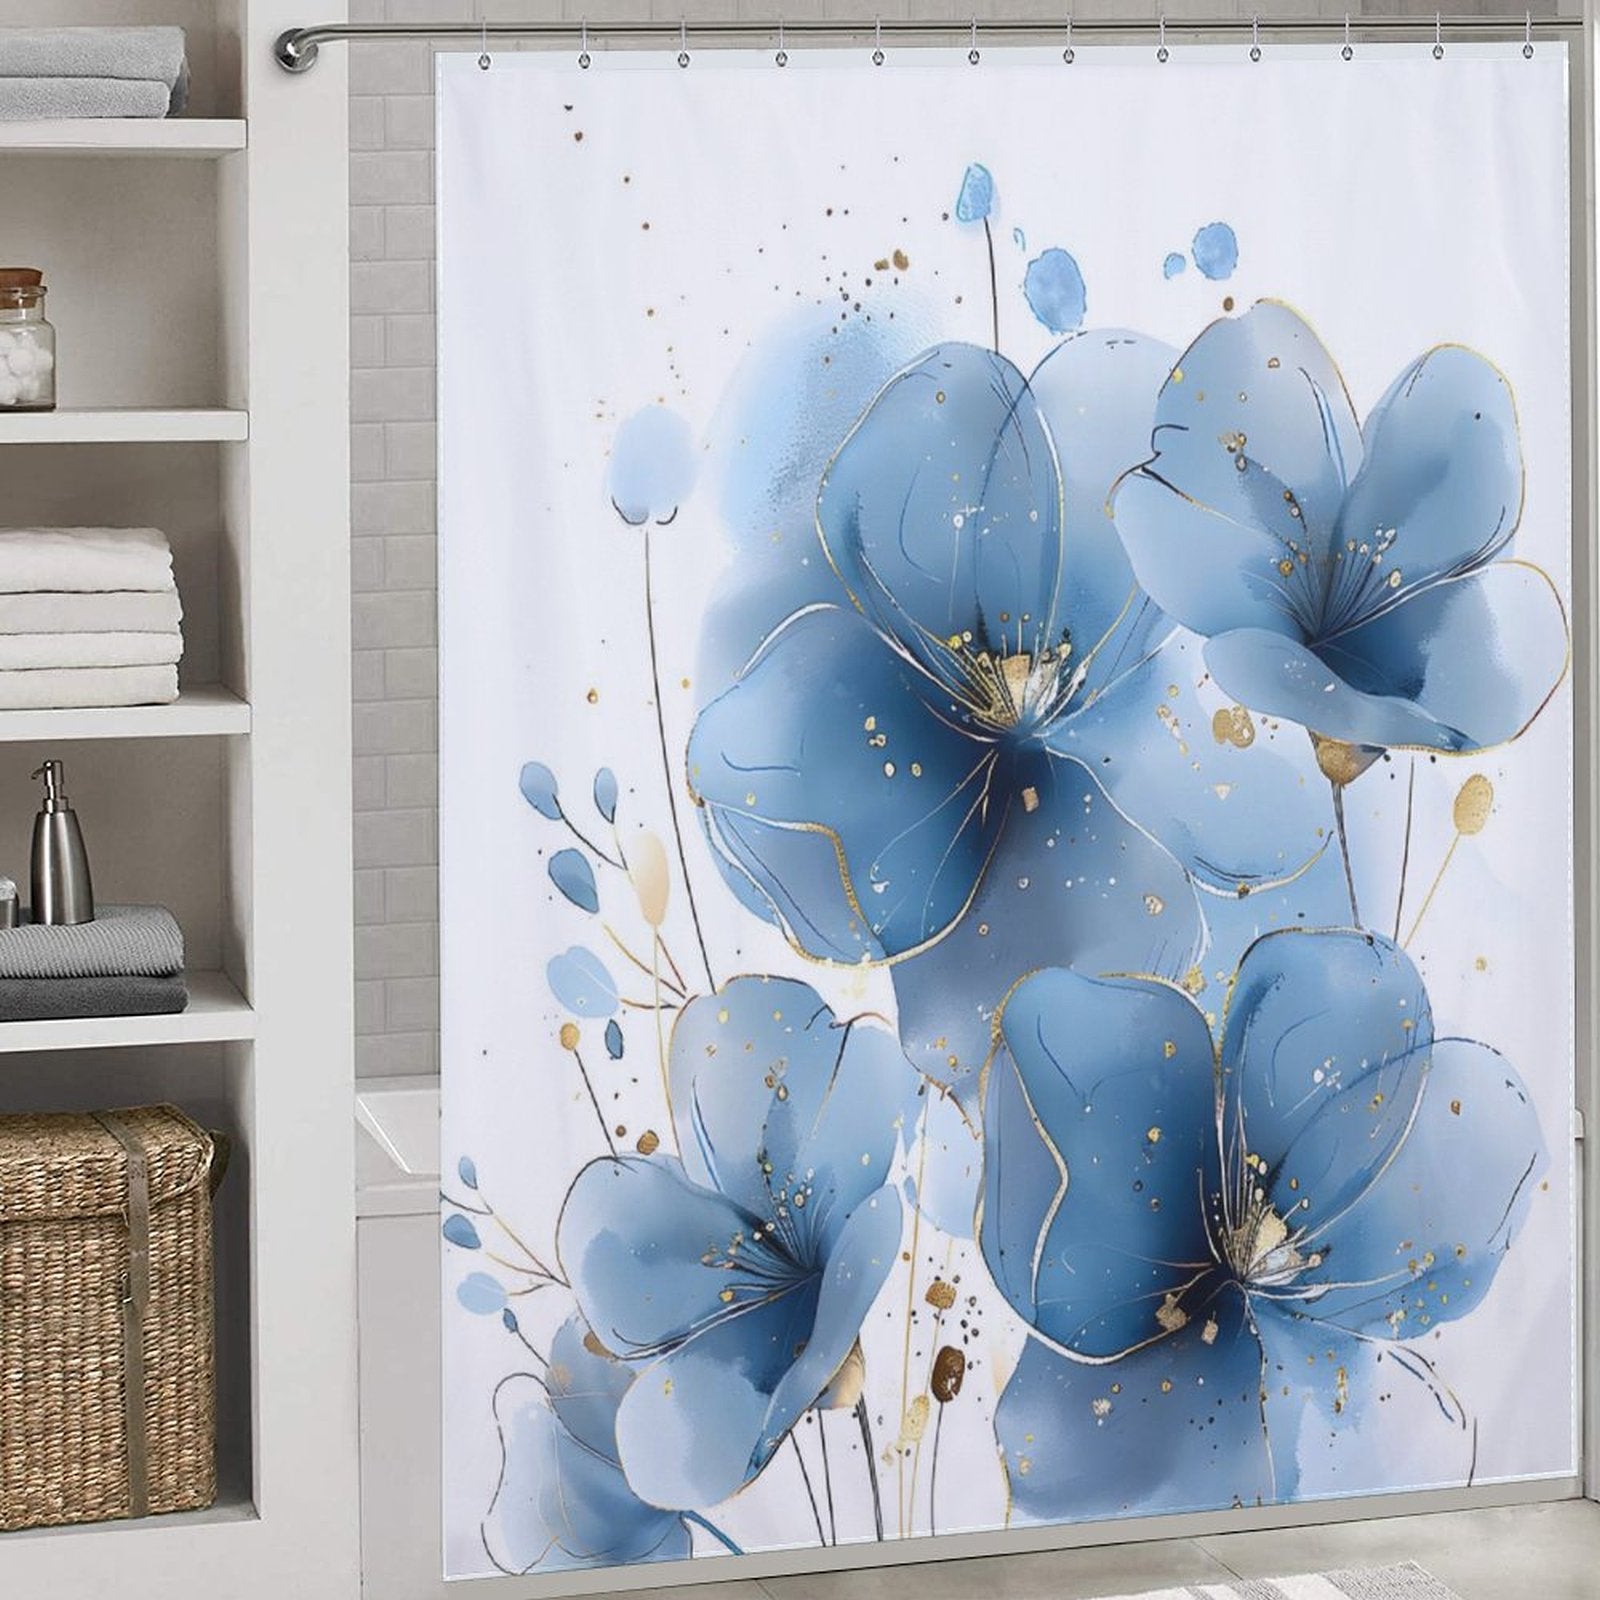 Bathroom with a Cotton Cat Abstract Modern Art Blue Flower Minimalist Watercolor Blue Floral Shower Curtain-Cottoncat, evoking a minimalist watercolor aesthetic. A shelving unit in the background holds neatly folded towels and various bathroom items.